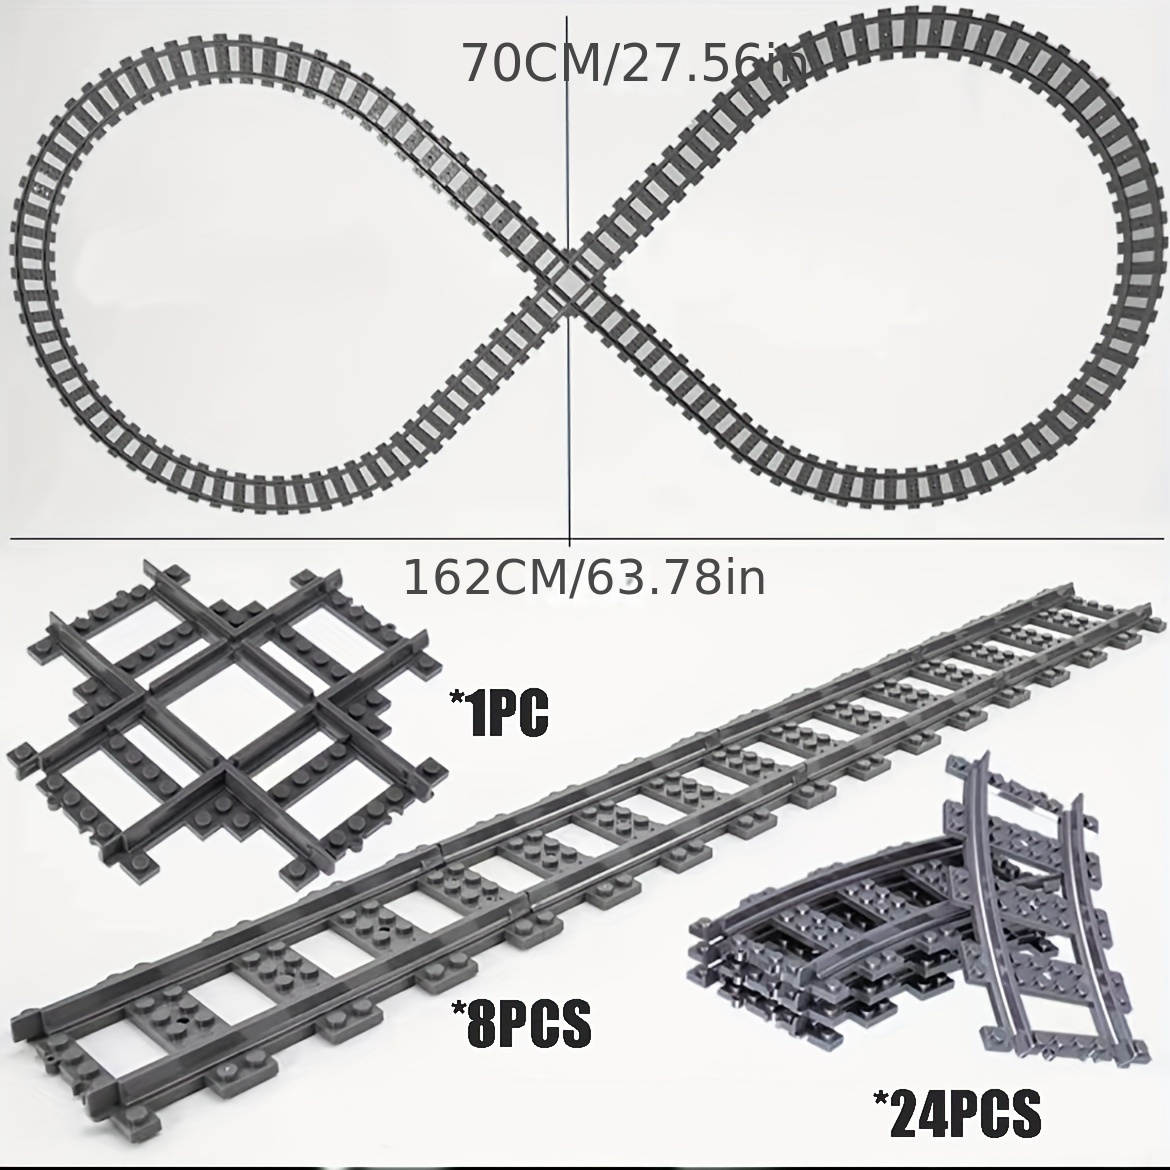 Track Set, Train Toys With Tracks And Building Blocks, Train Set